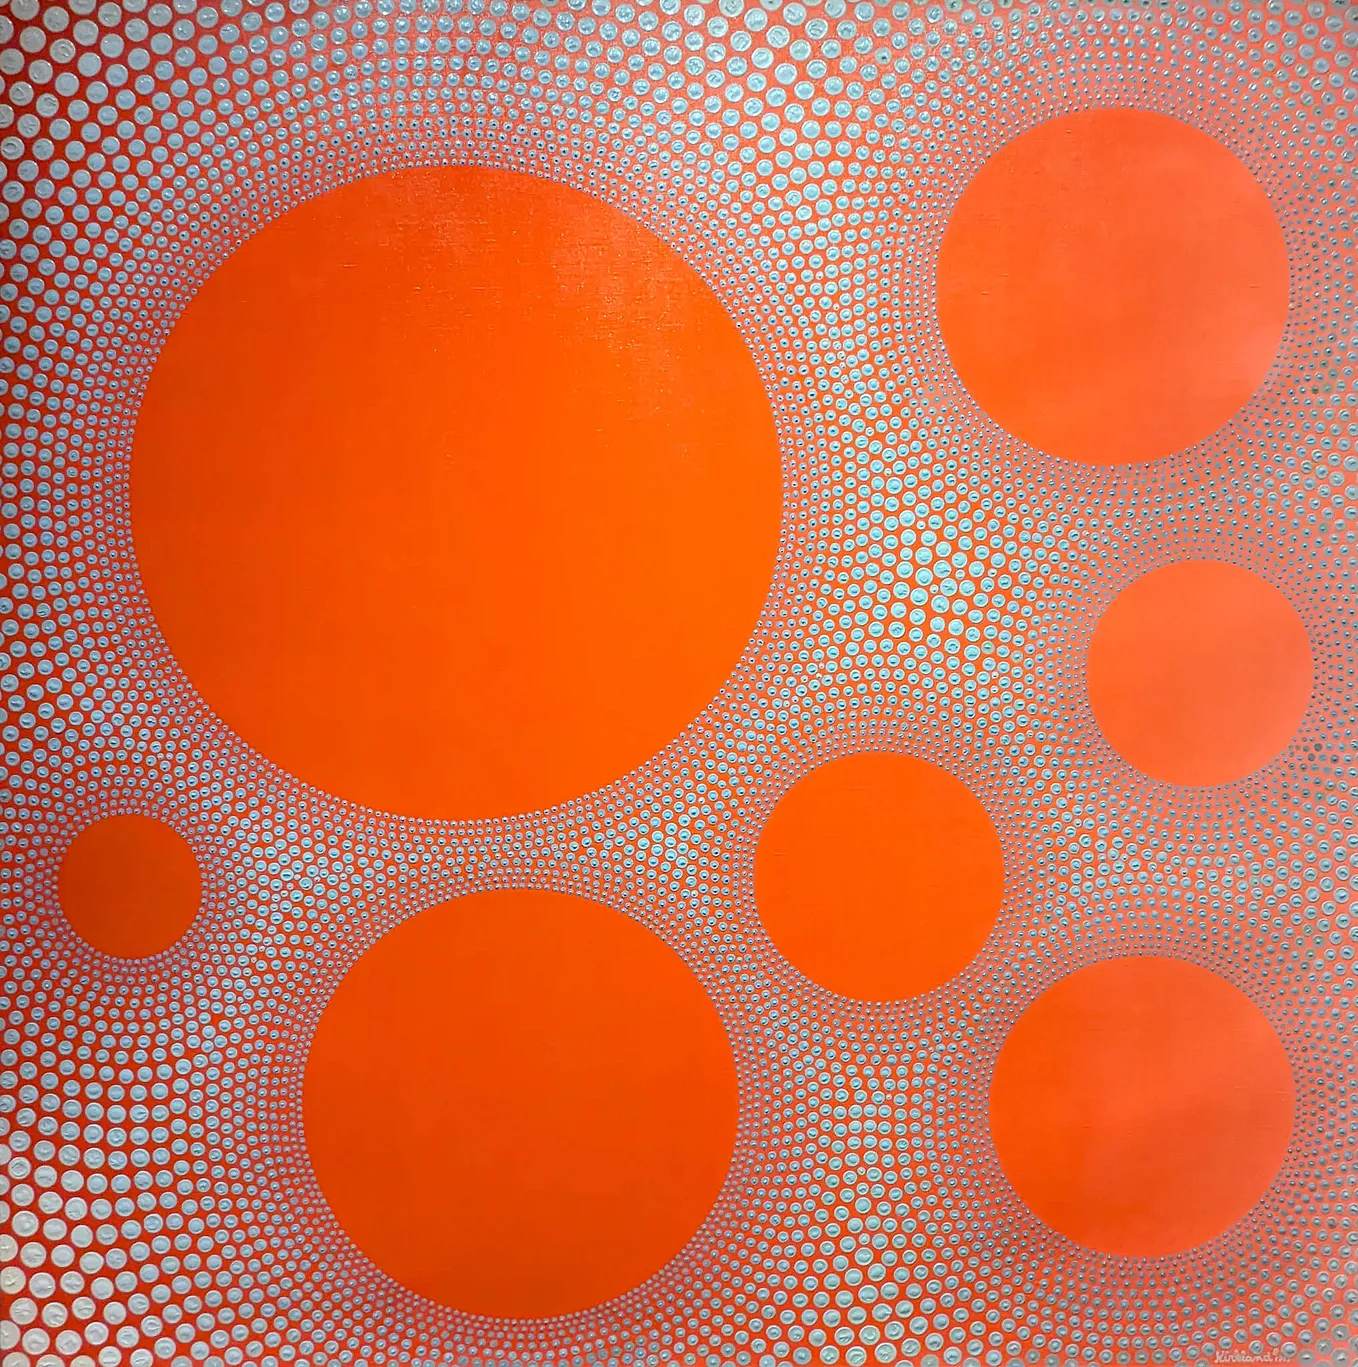 Picture of a painting of orange circles on a background of tiny orange circle outlines